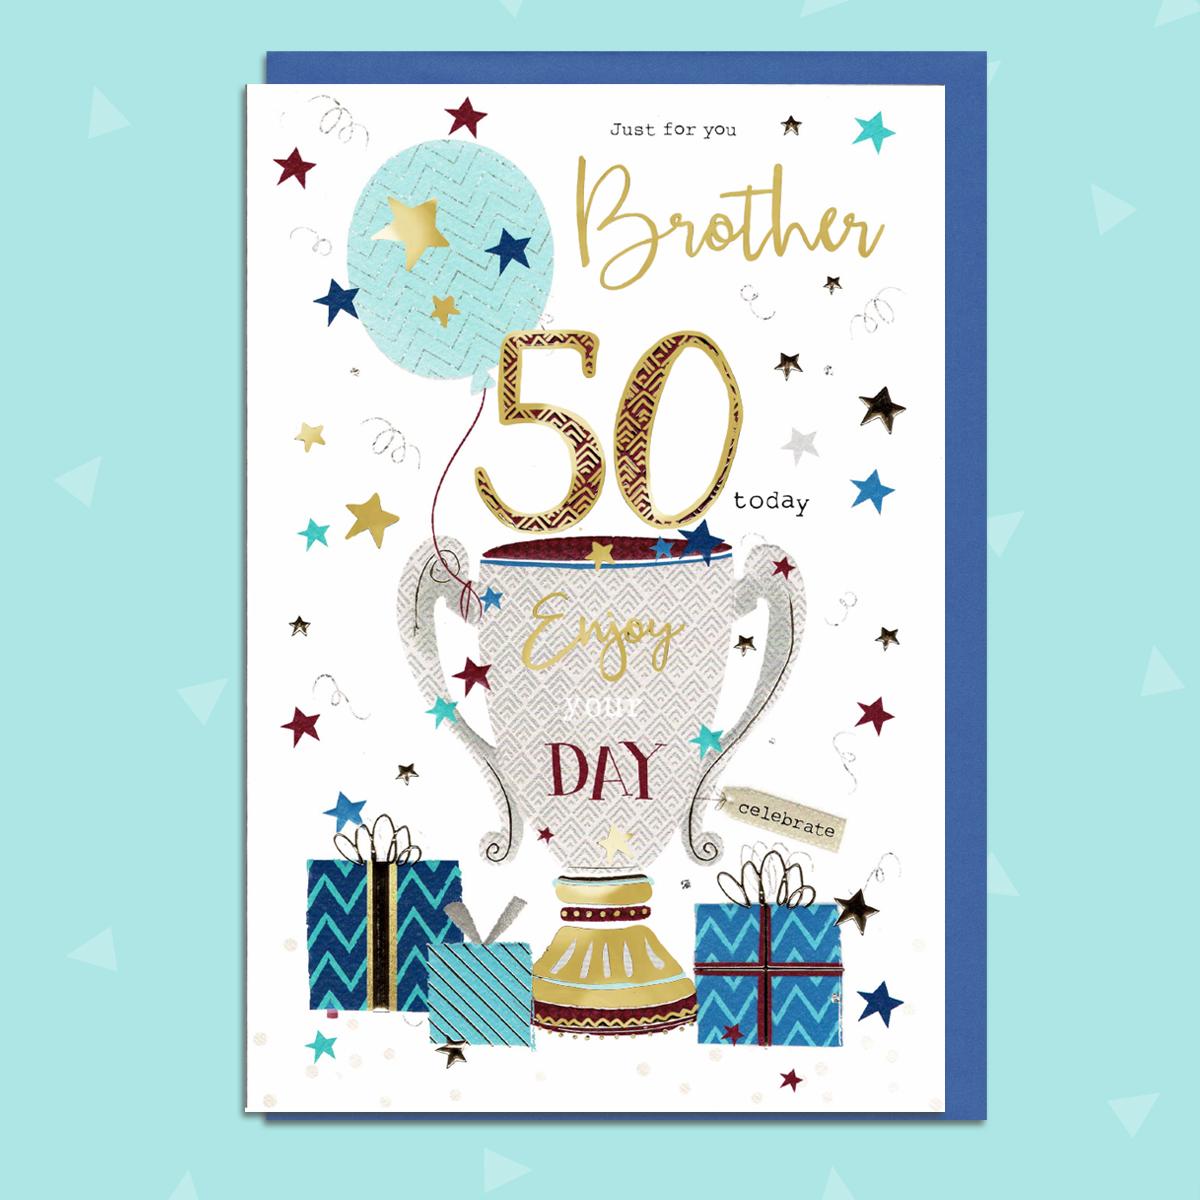 Brother Age 50 Birthday Card Featuring A Trophy And Presents